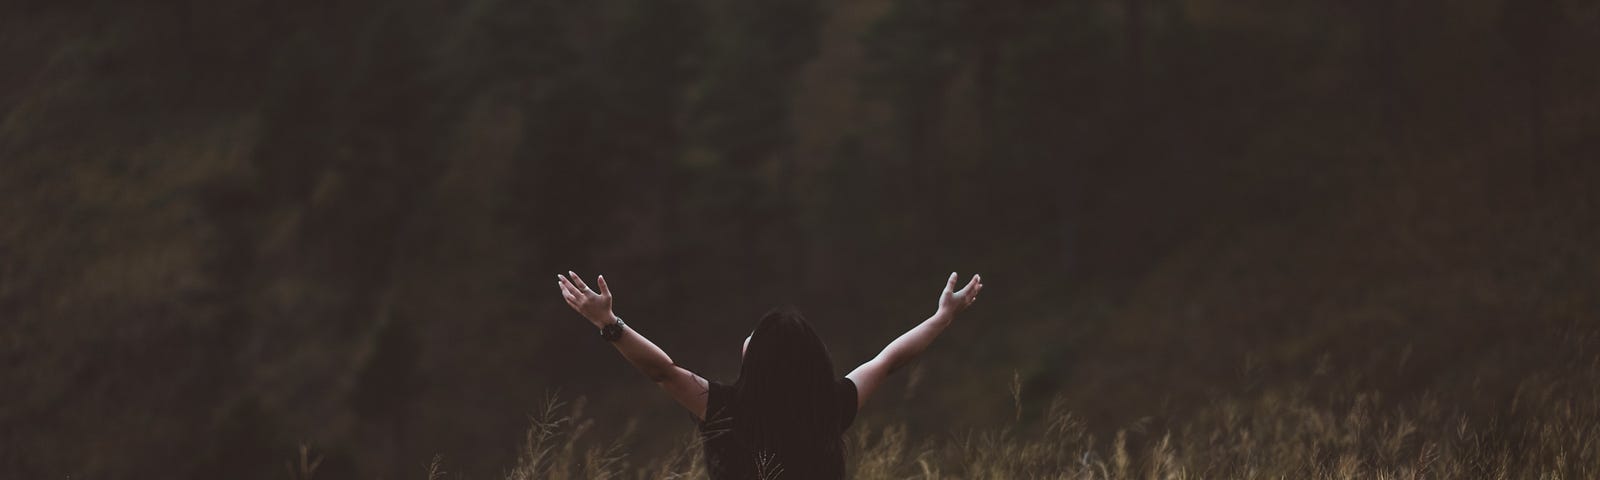 Woman standing in a field with her hands outstretched in worship to God